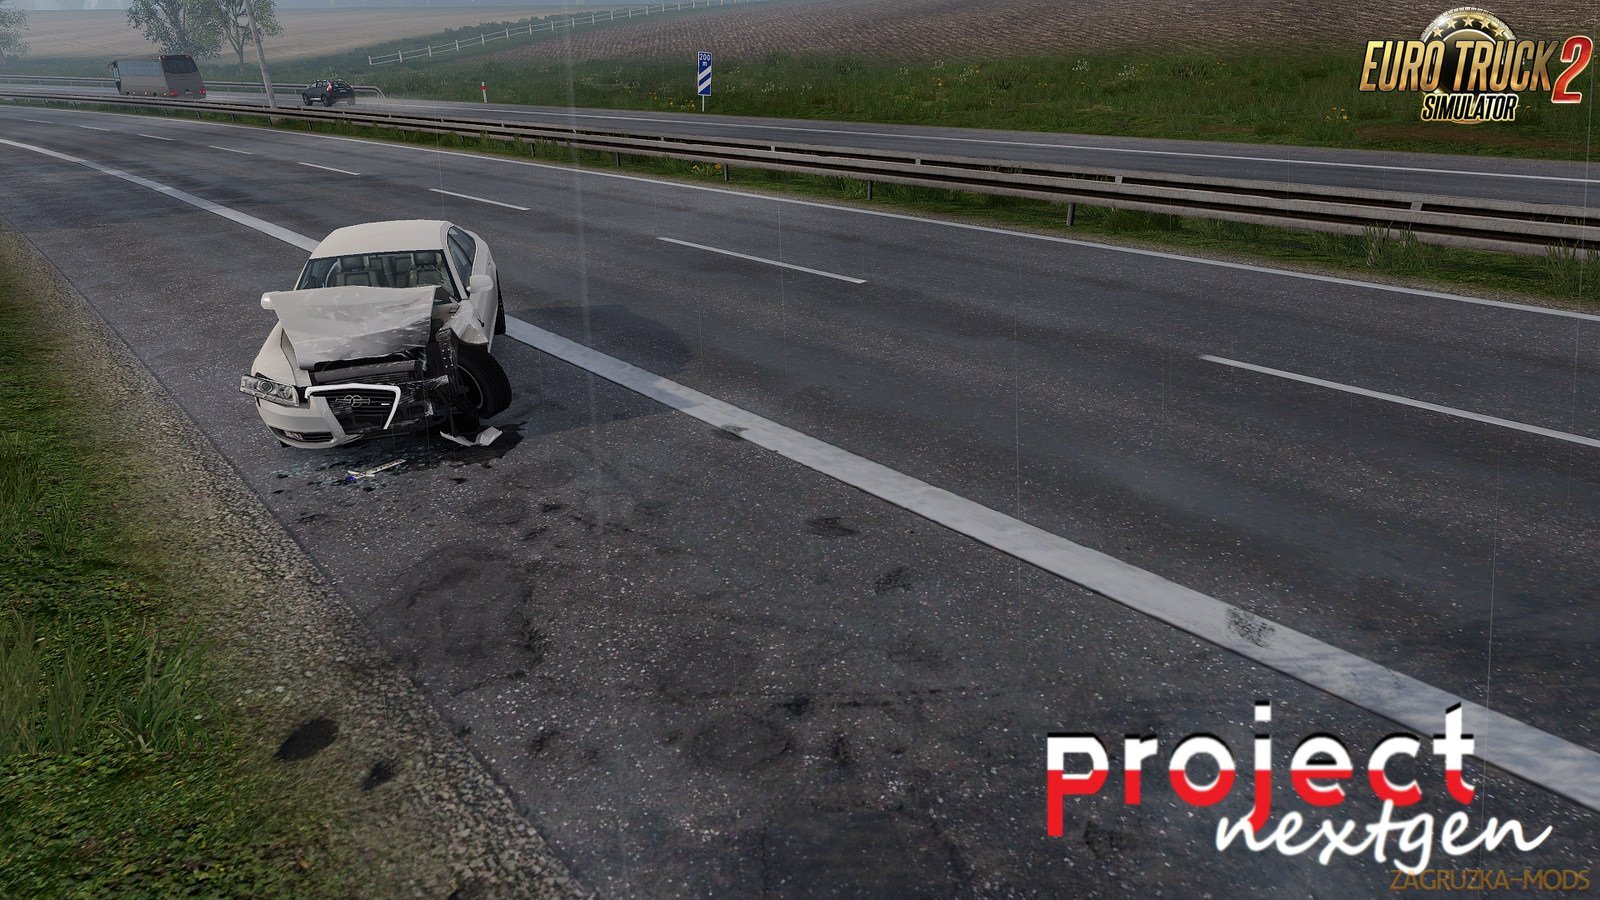 Project Next-Gen Graphic Mod v1.7 by DamianSVW (1.35.x) for ETS2